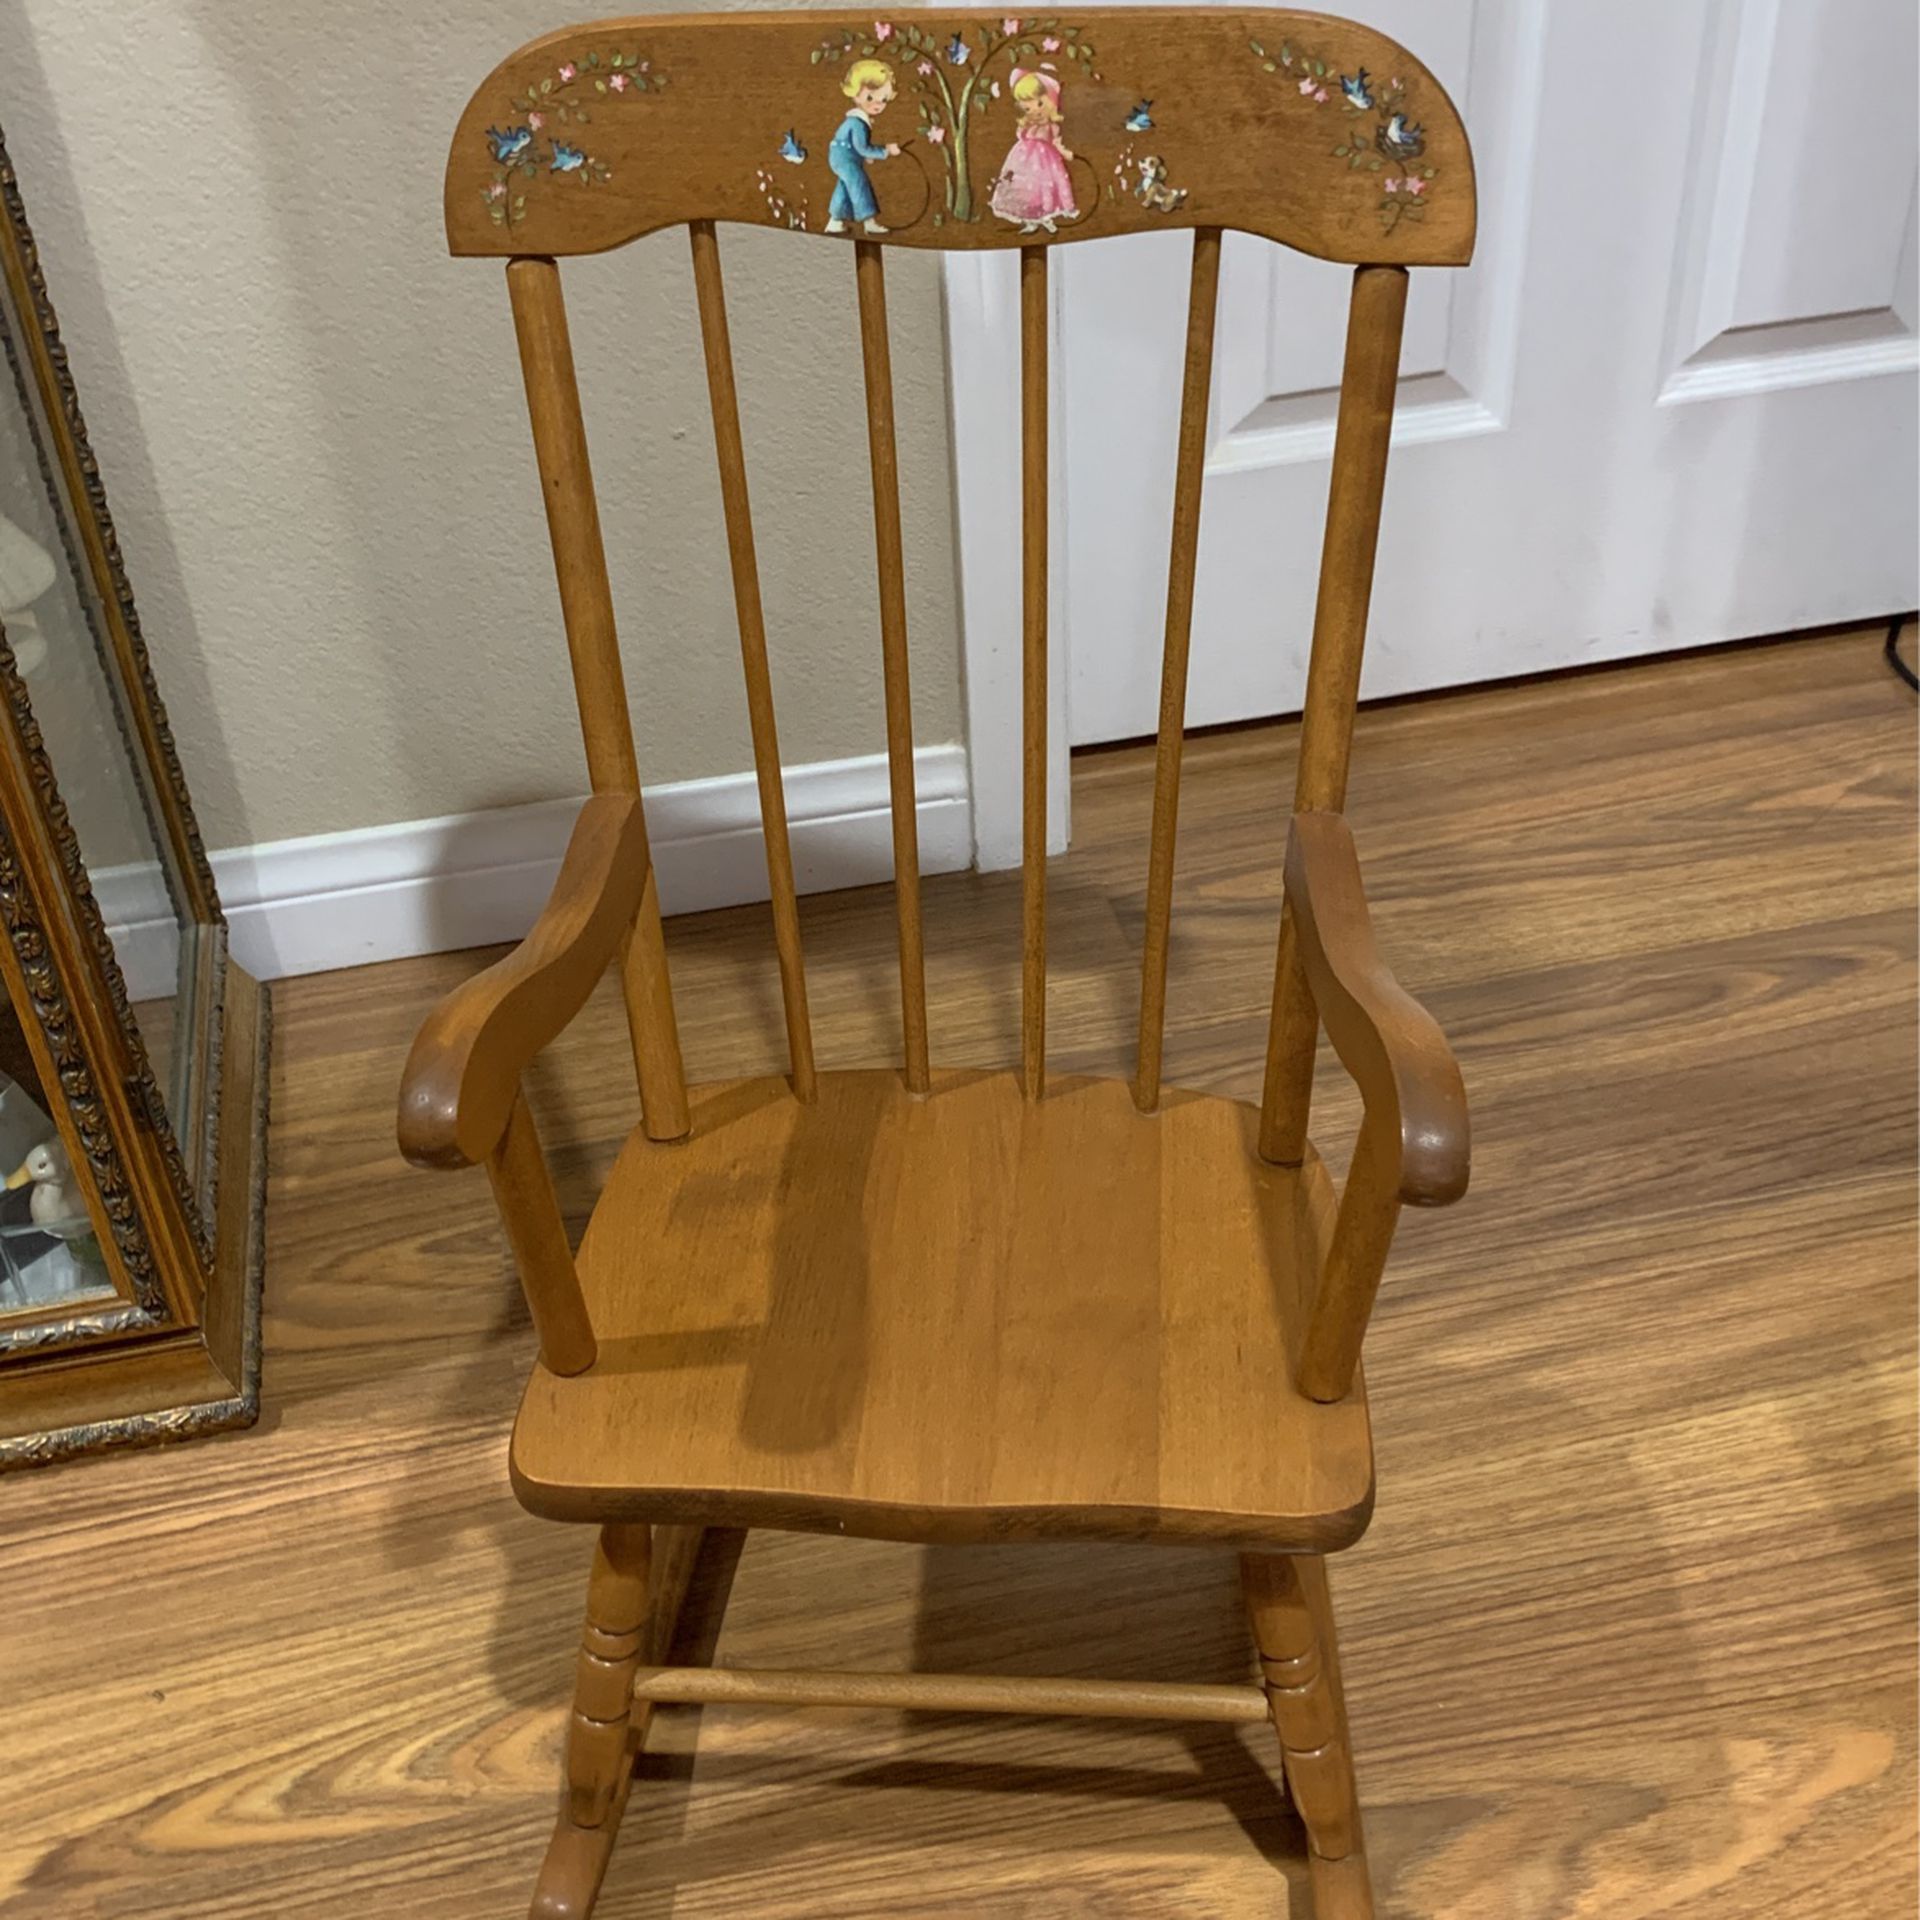 Musical Antique Child Rocking Chair Great Condition And Very Sturdy 